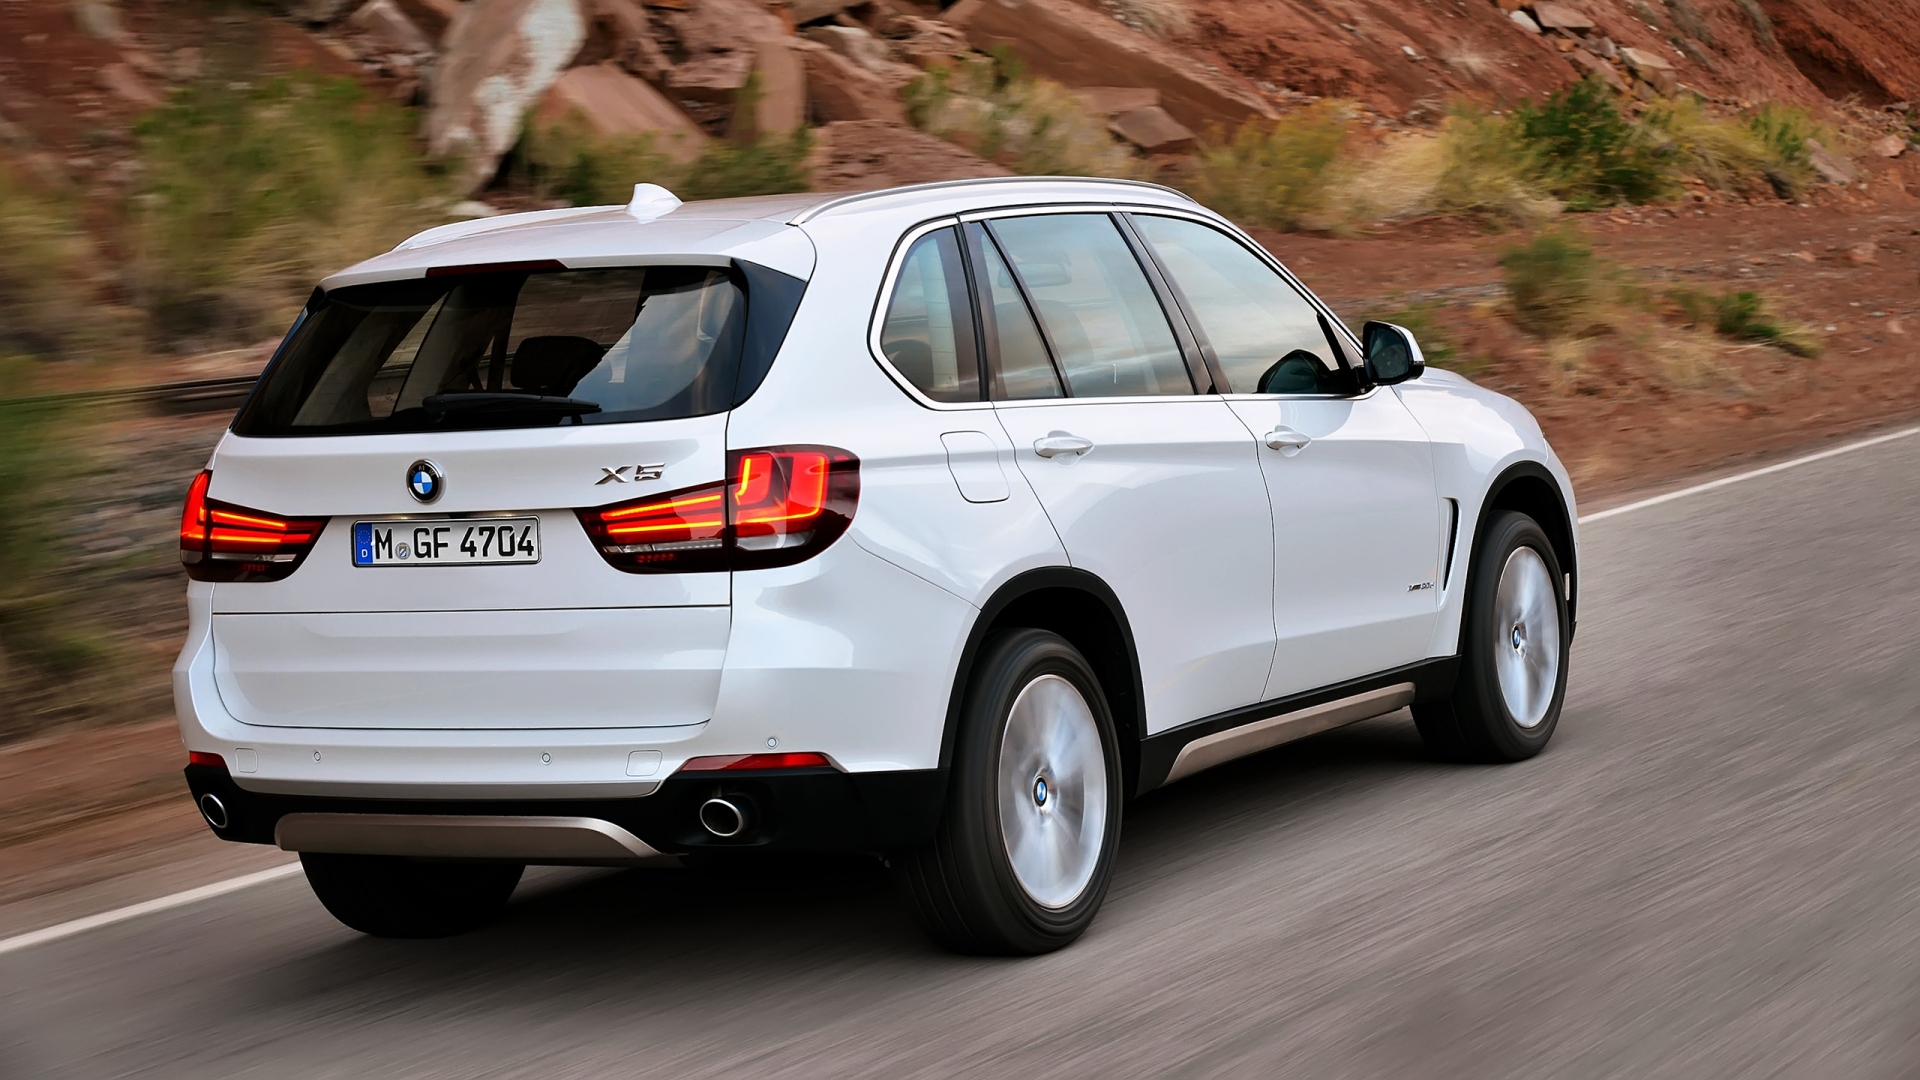 2014 BMW X5 Rear for 1920 x 1080 HDTV 1080p resolution